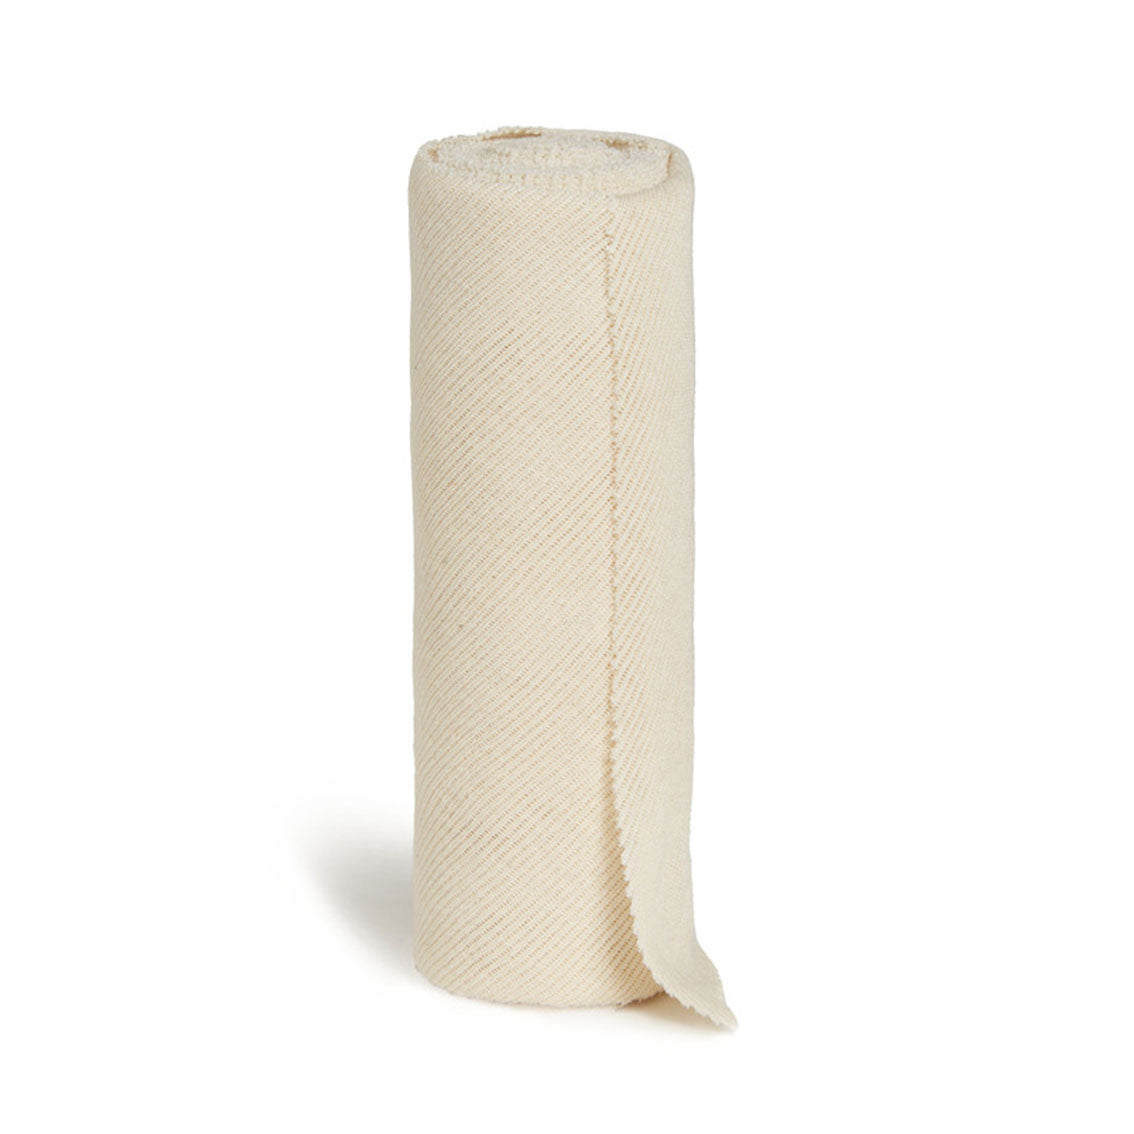 Cotton Roll - 1 lb. without Inner Liner - Bioseal Inc